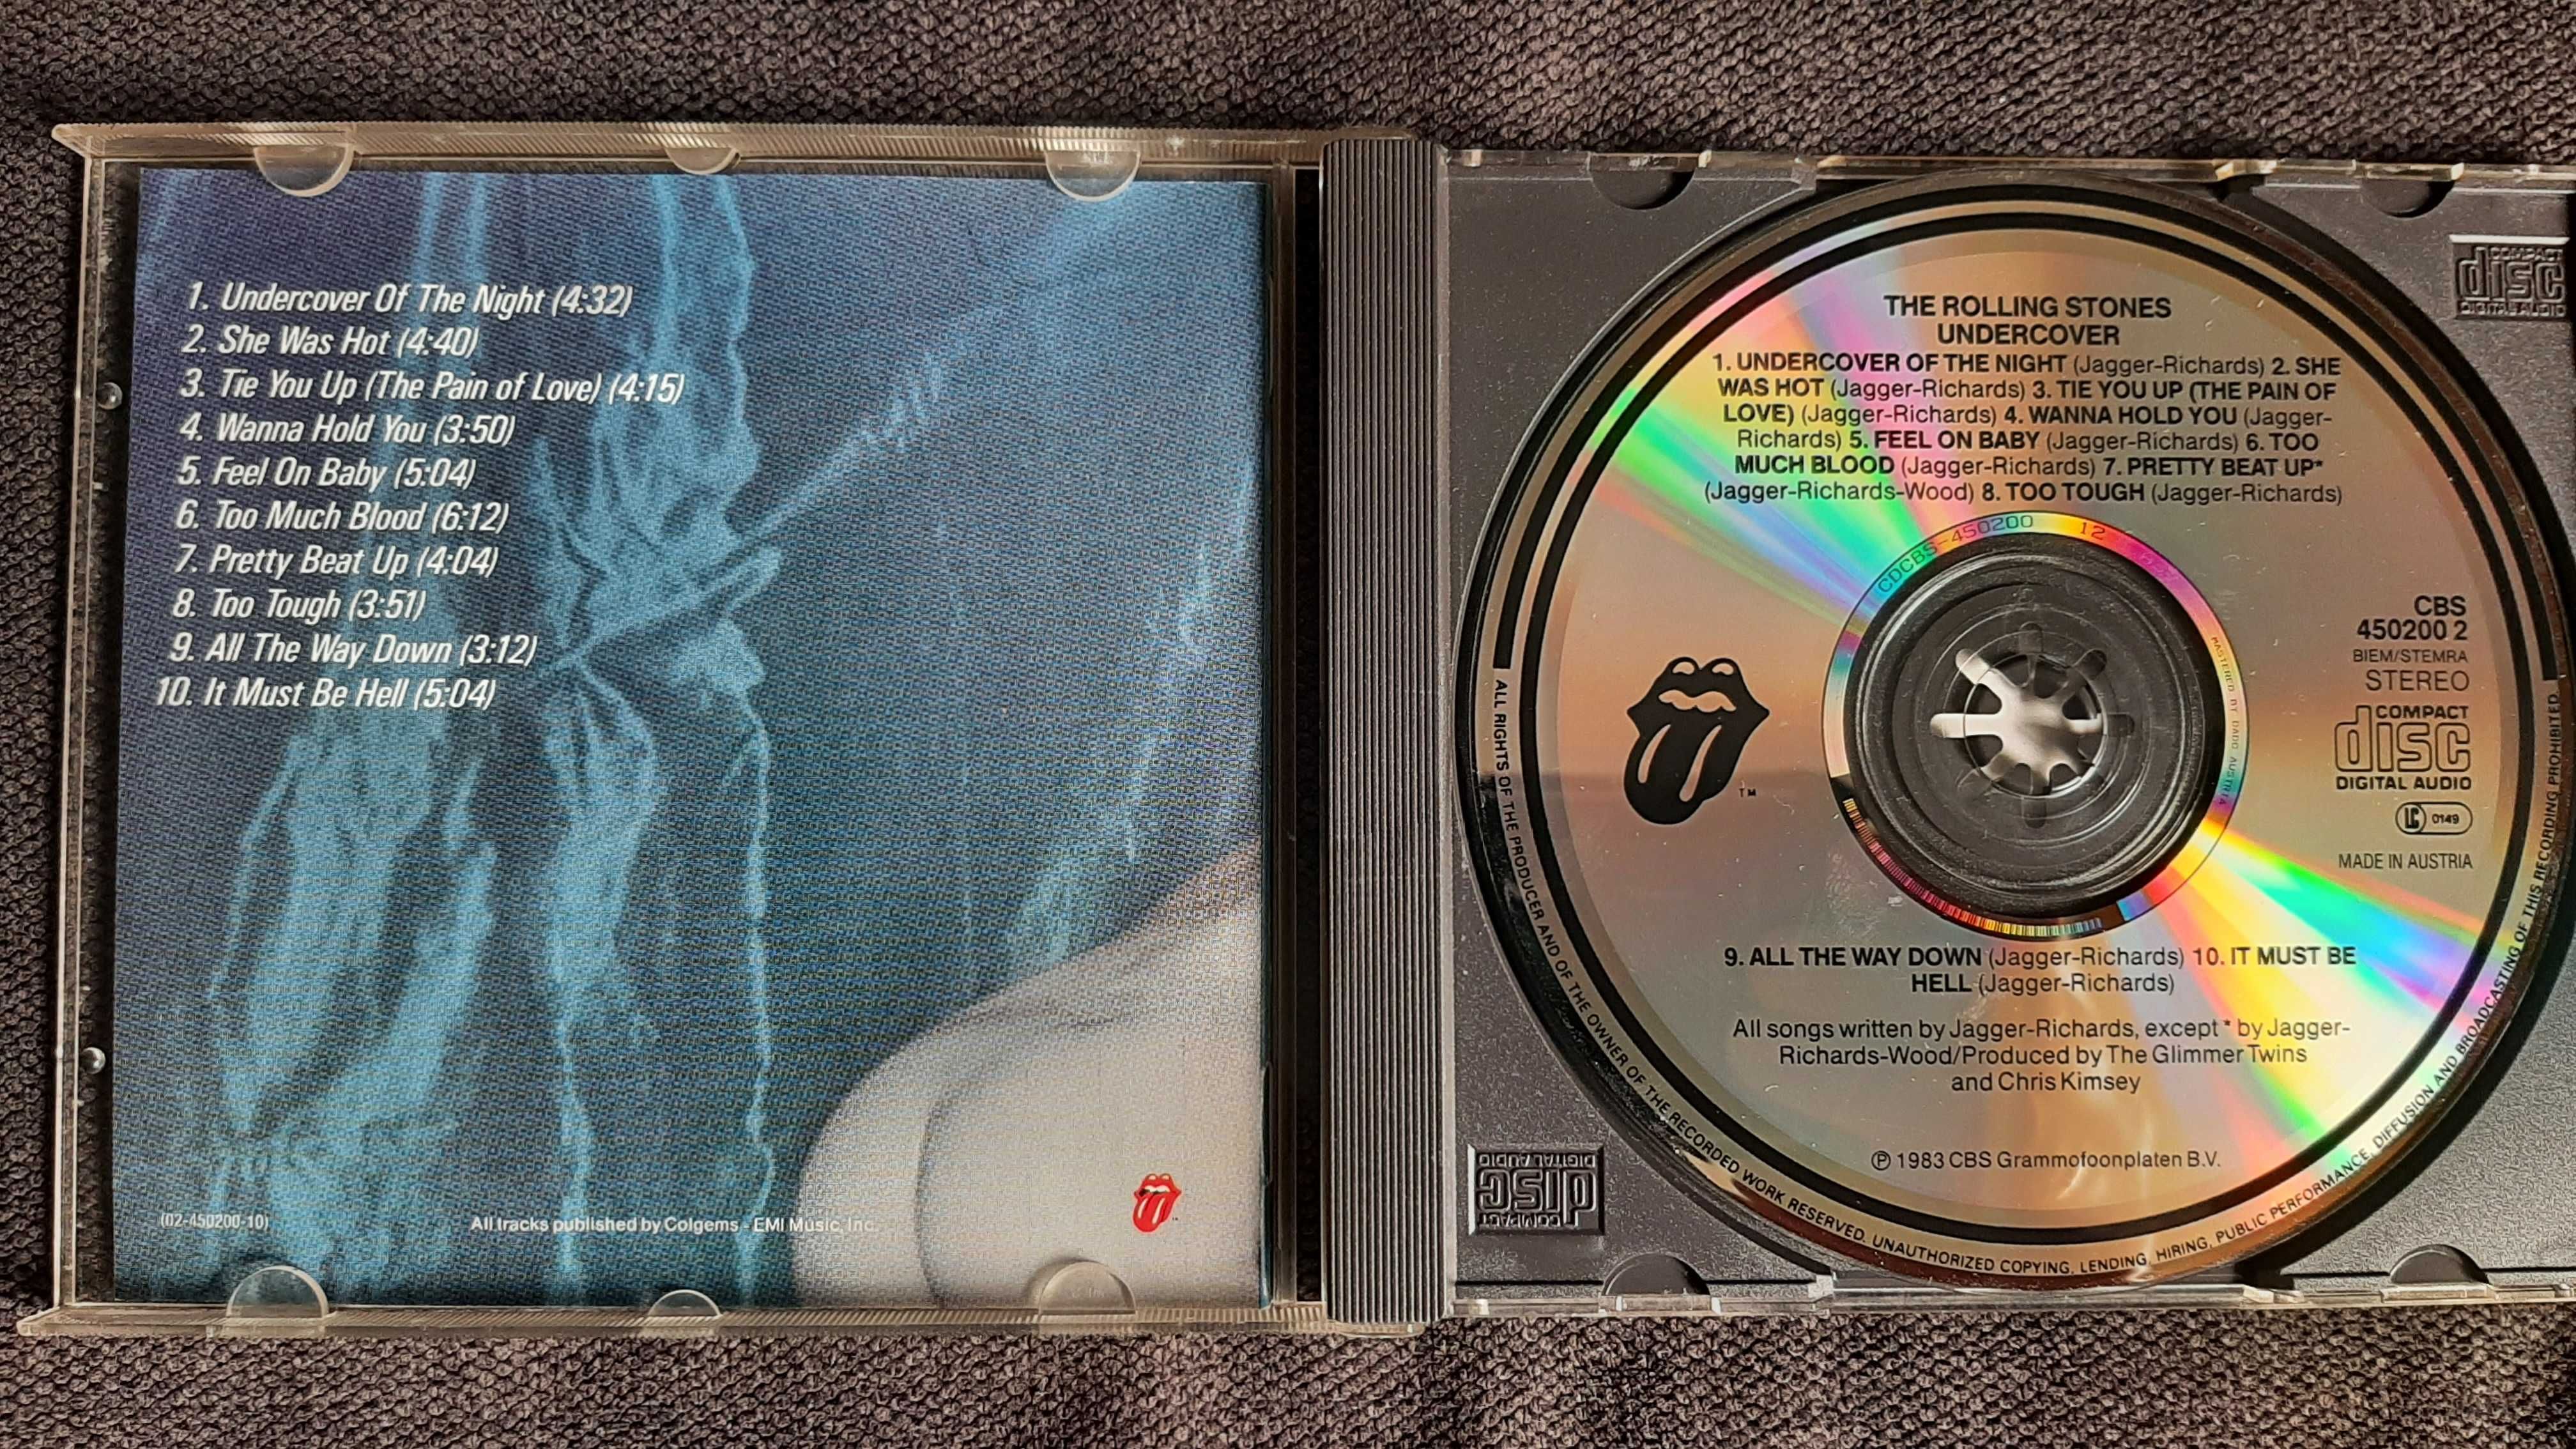 The Rolling Stones "Undercover" CD